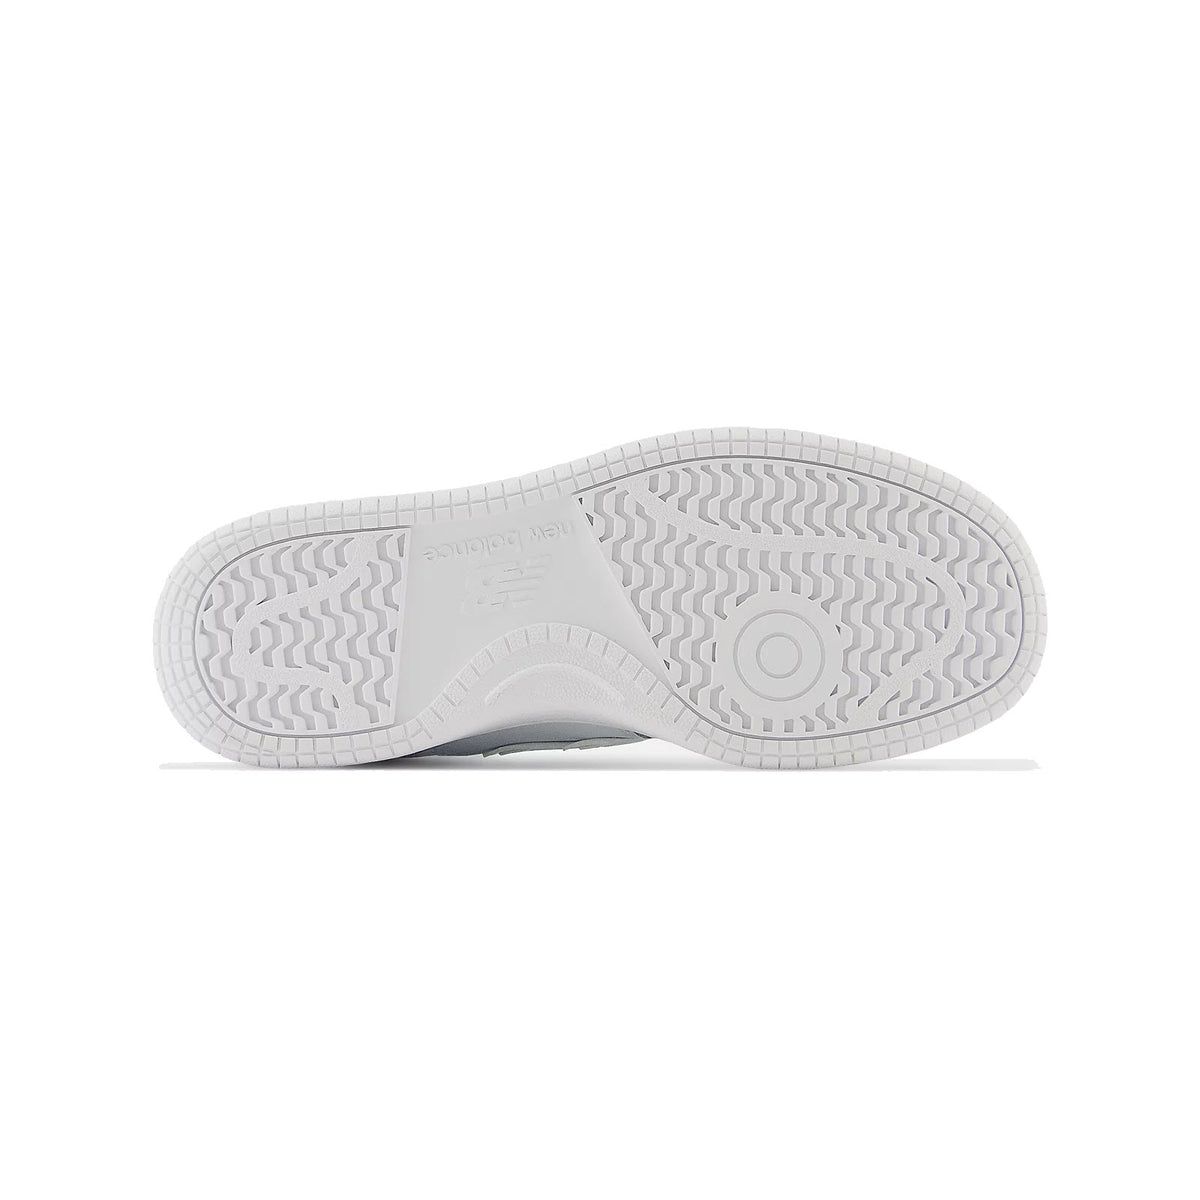 Bottom view of a New Balance Kids 480 White sneaker showing its textured sole with circular and wavy patterns.